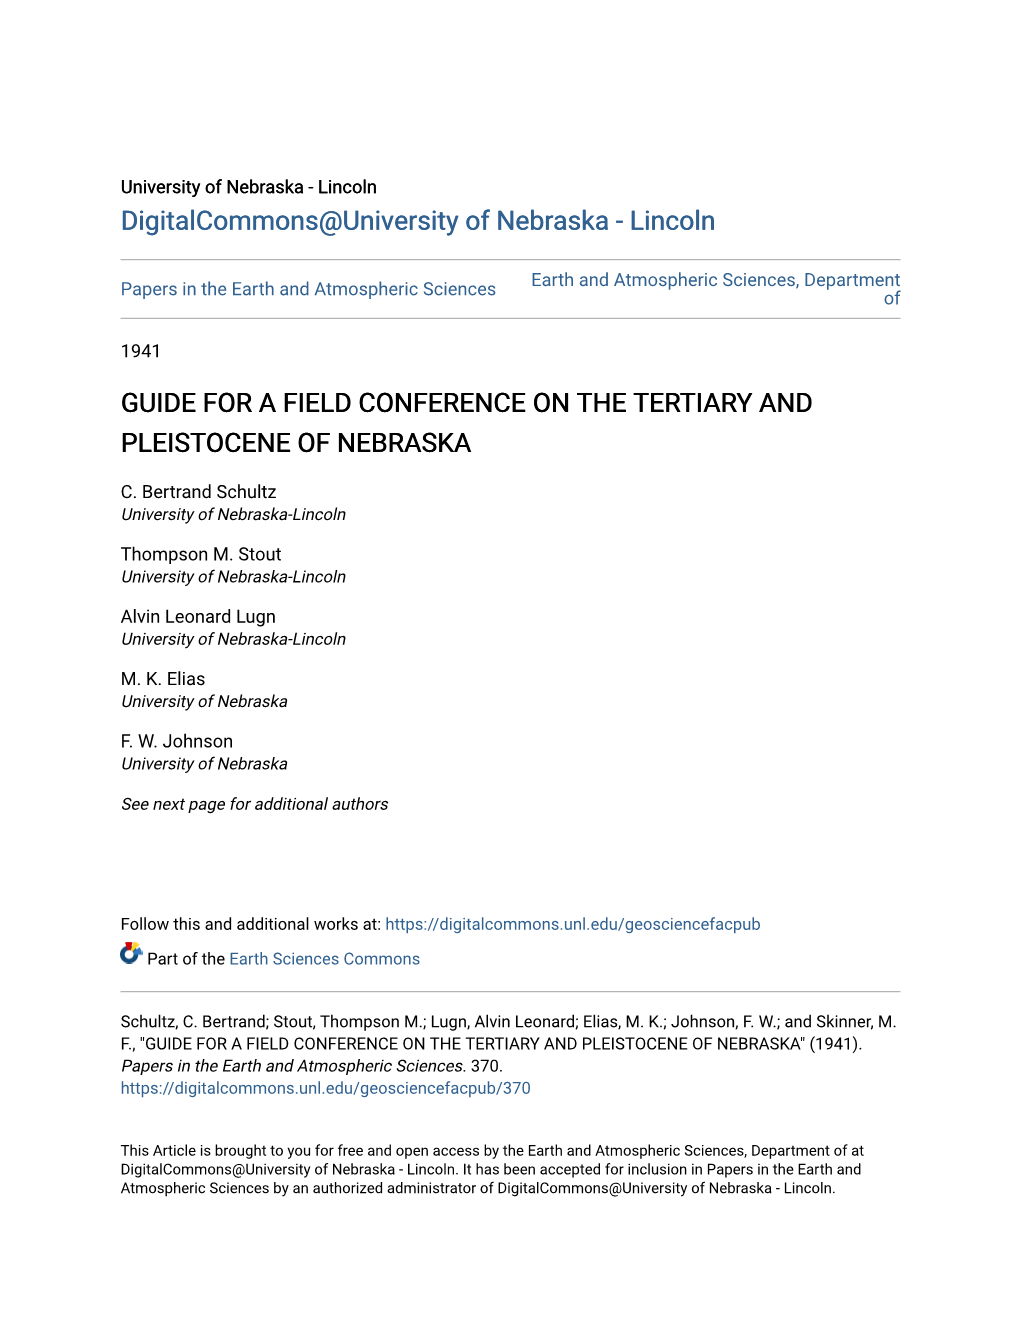 Guide for a Field Conference on the Tertiary and Pleistocene of Nebraska